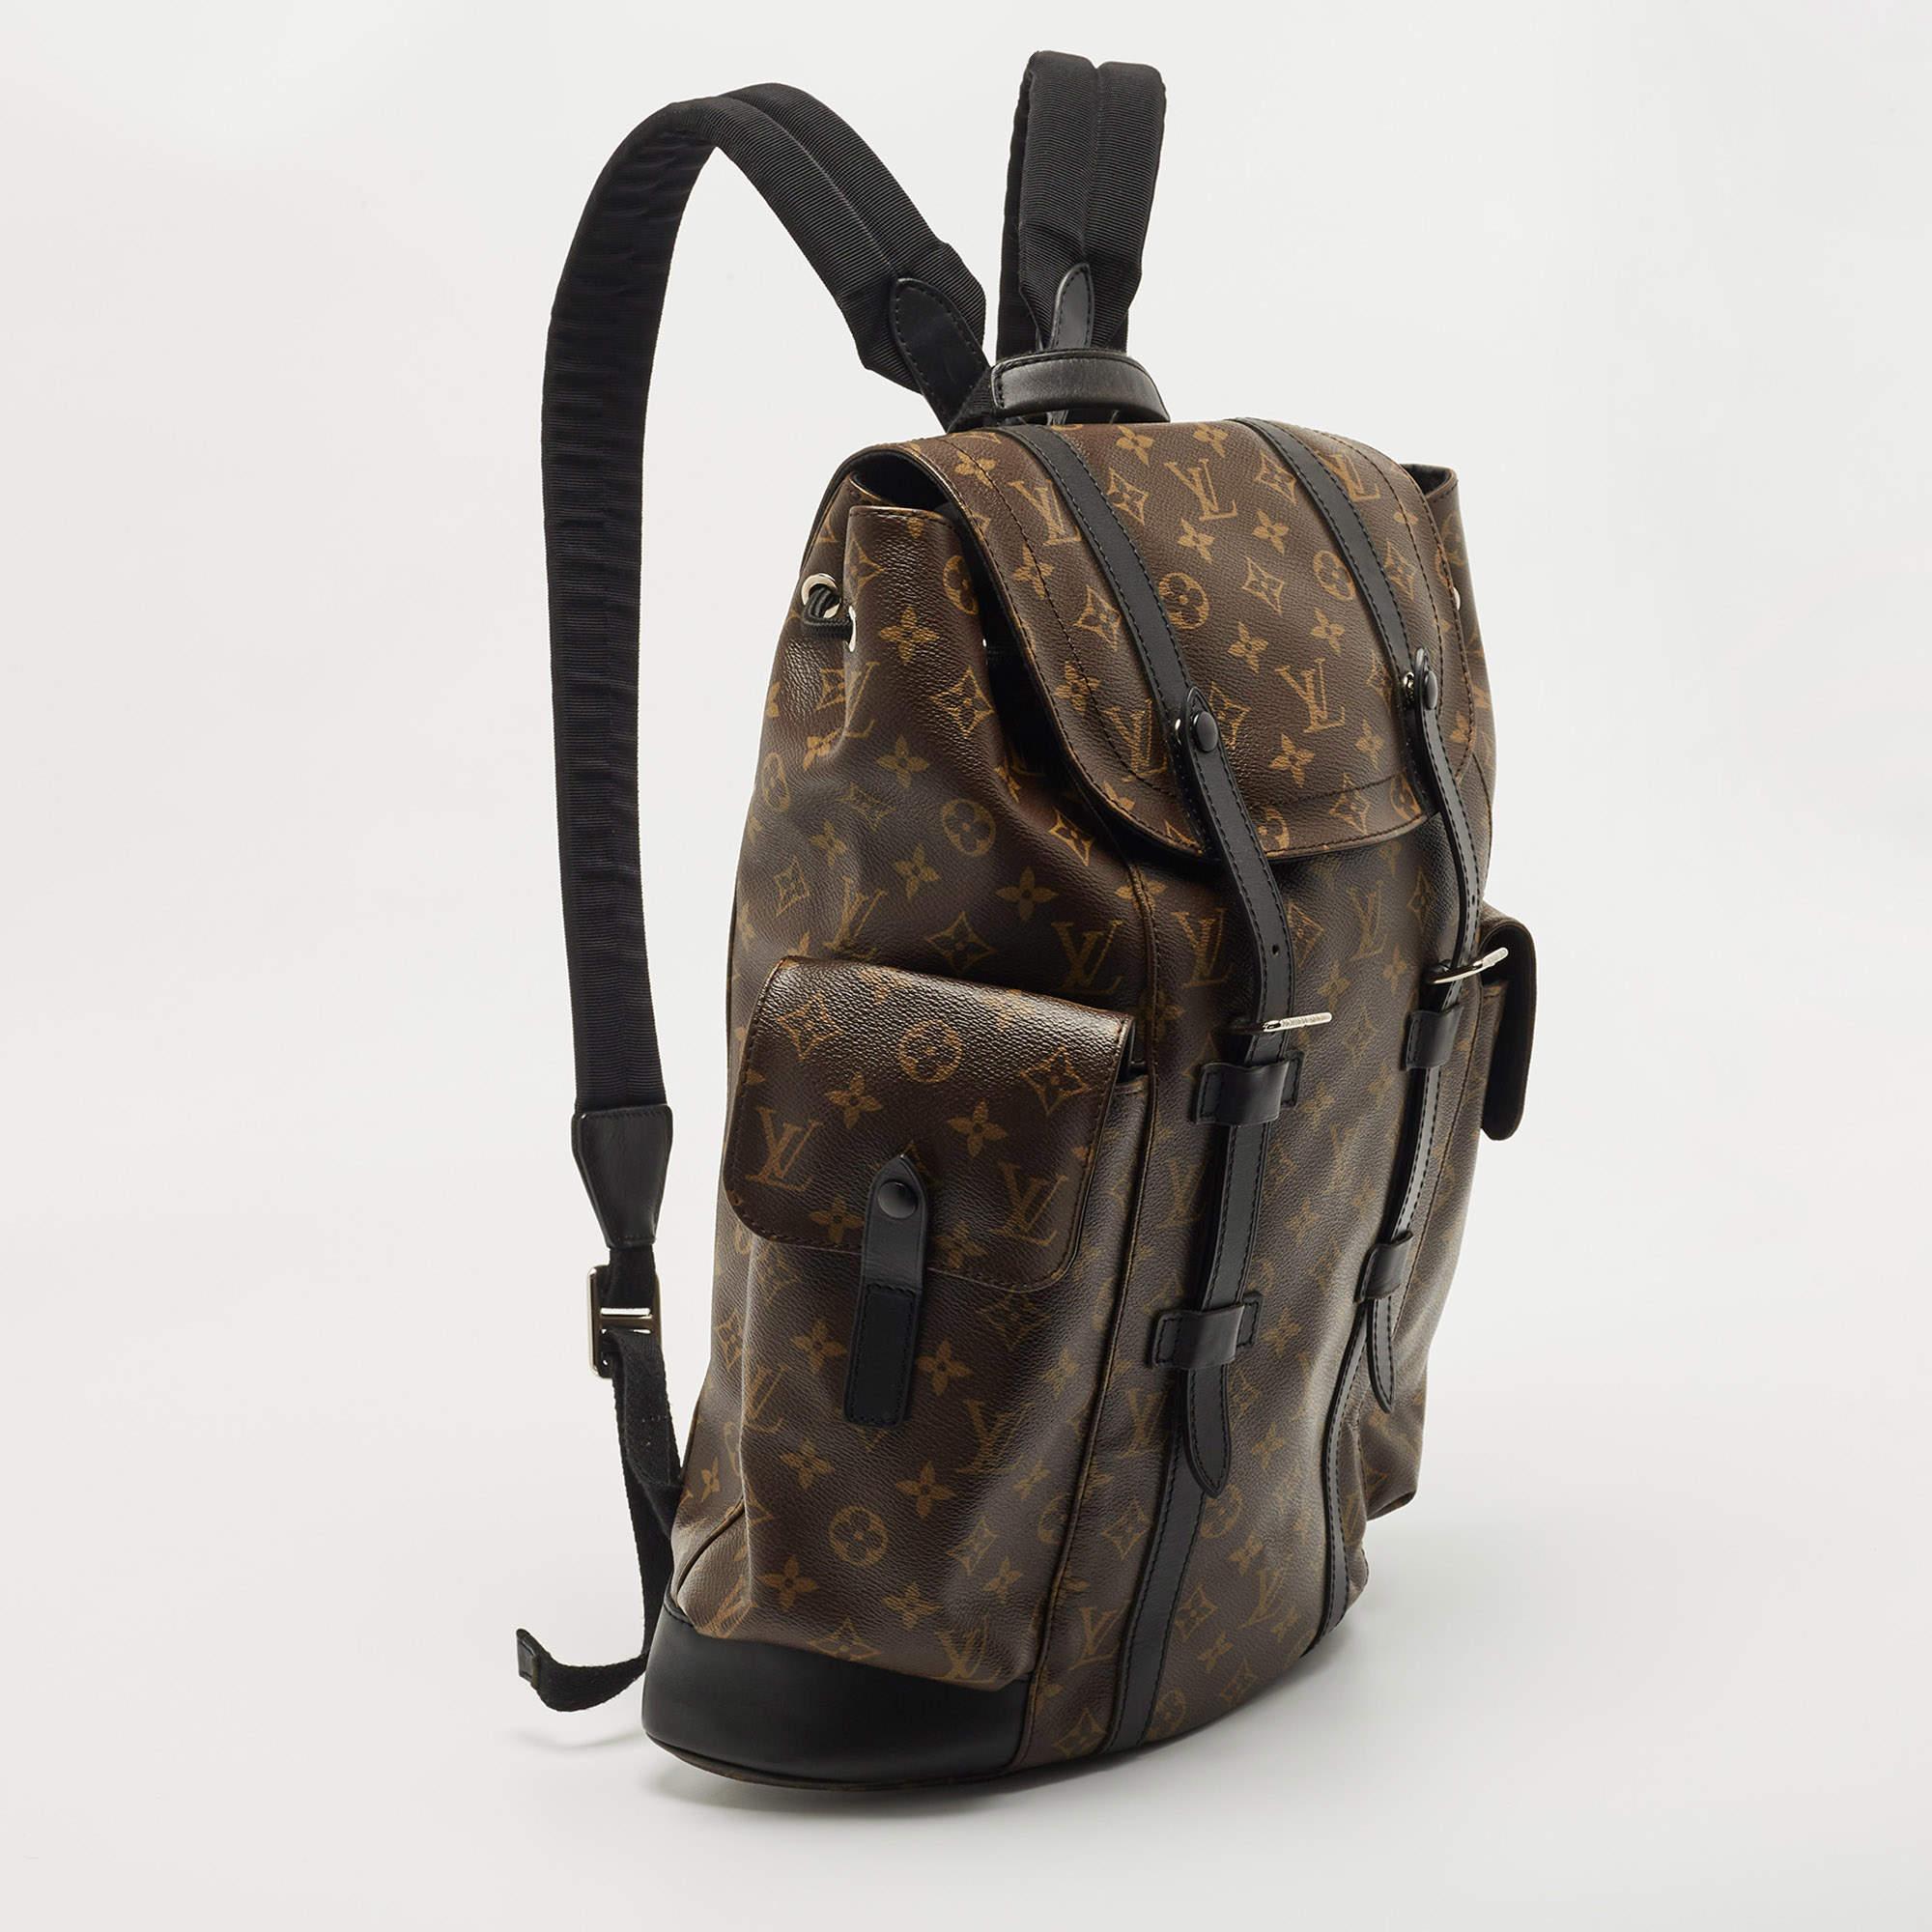 The Christopher MM backpack from Louis Vuitton is an on-point travel bag. This stylish creation is crafted from Monogram canvas and detailed with leather trims and silver-tone hardware. It has exterior pockets, comfortable handles, and a canvas